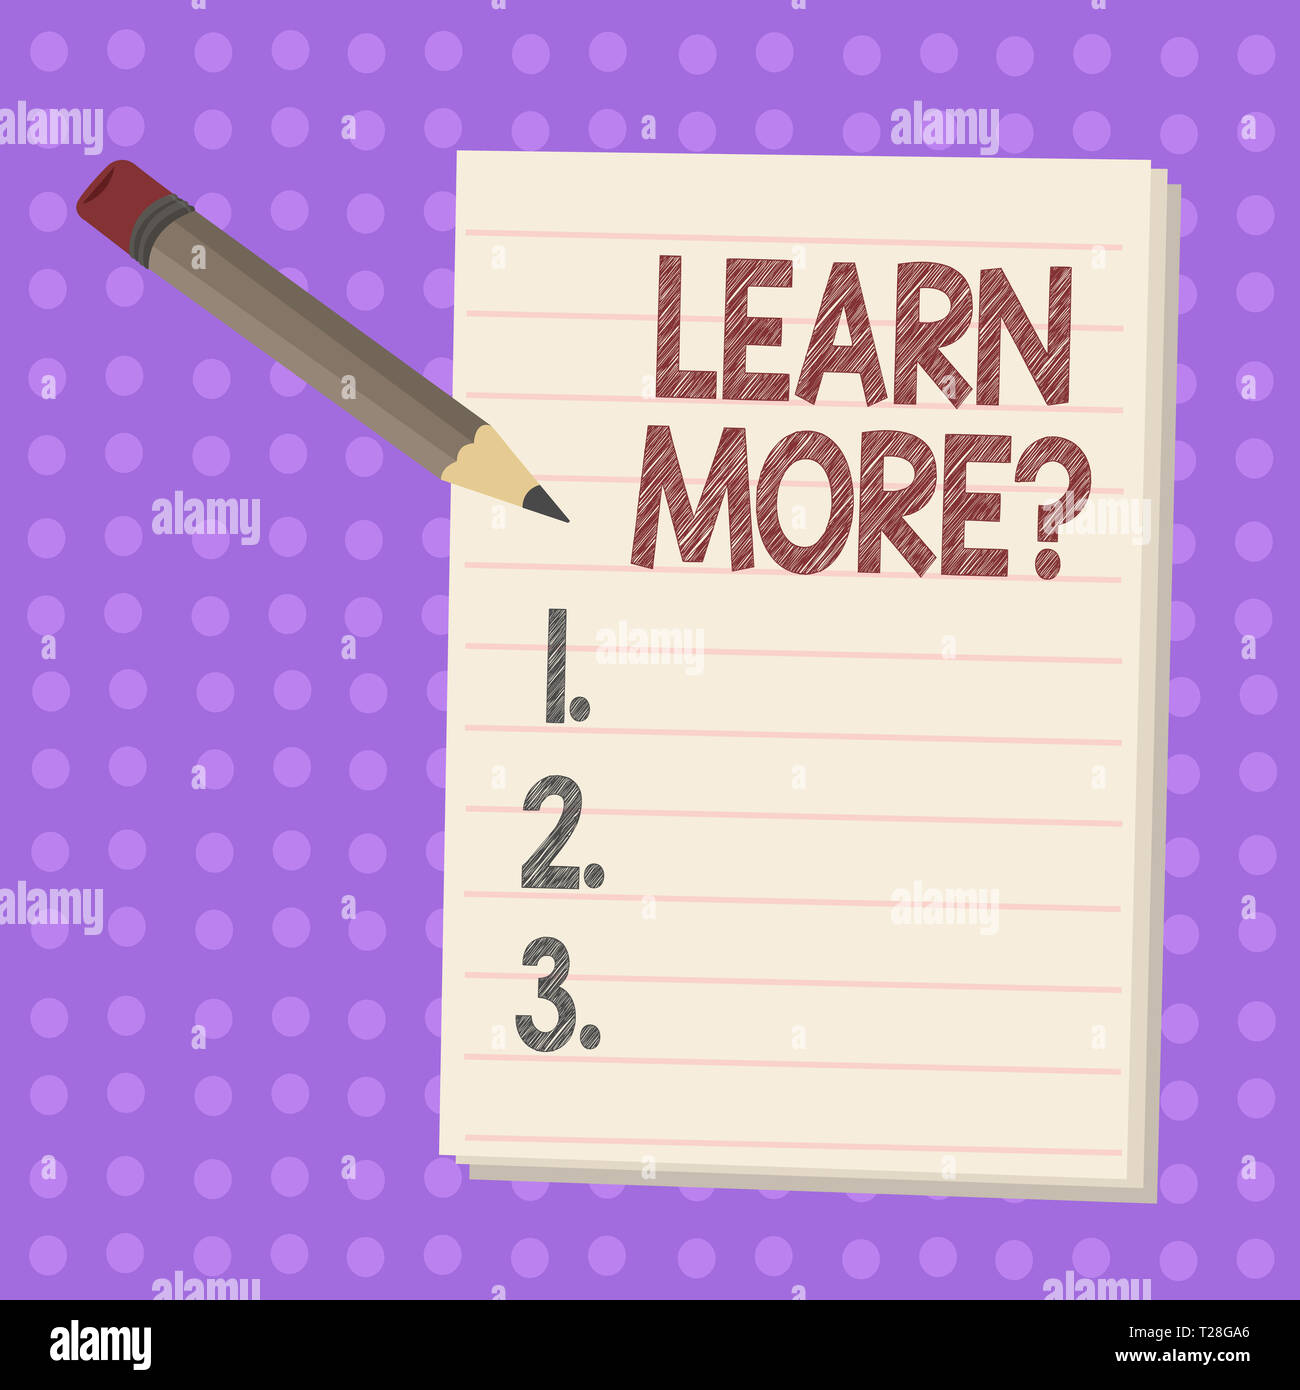 Writing note showing Learn More question. Business concept for gain knowledge or skill by studying or practicing Pencil with Eraser and Pad on Two Ton Stock Photo